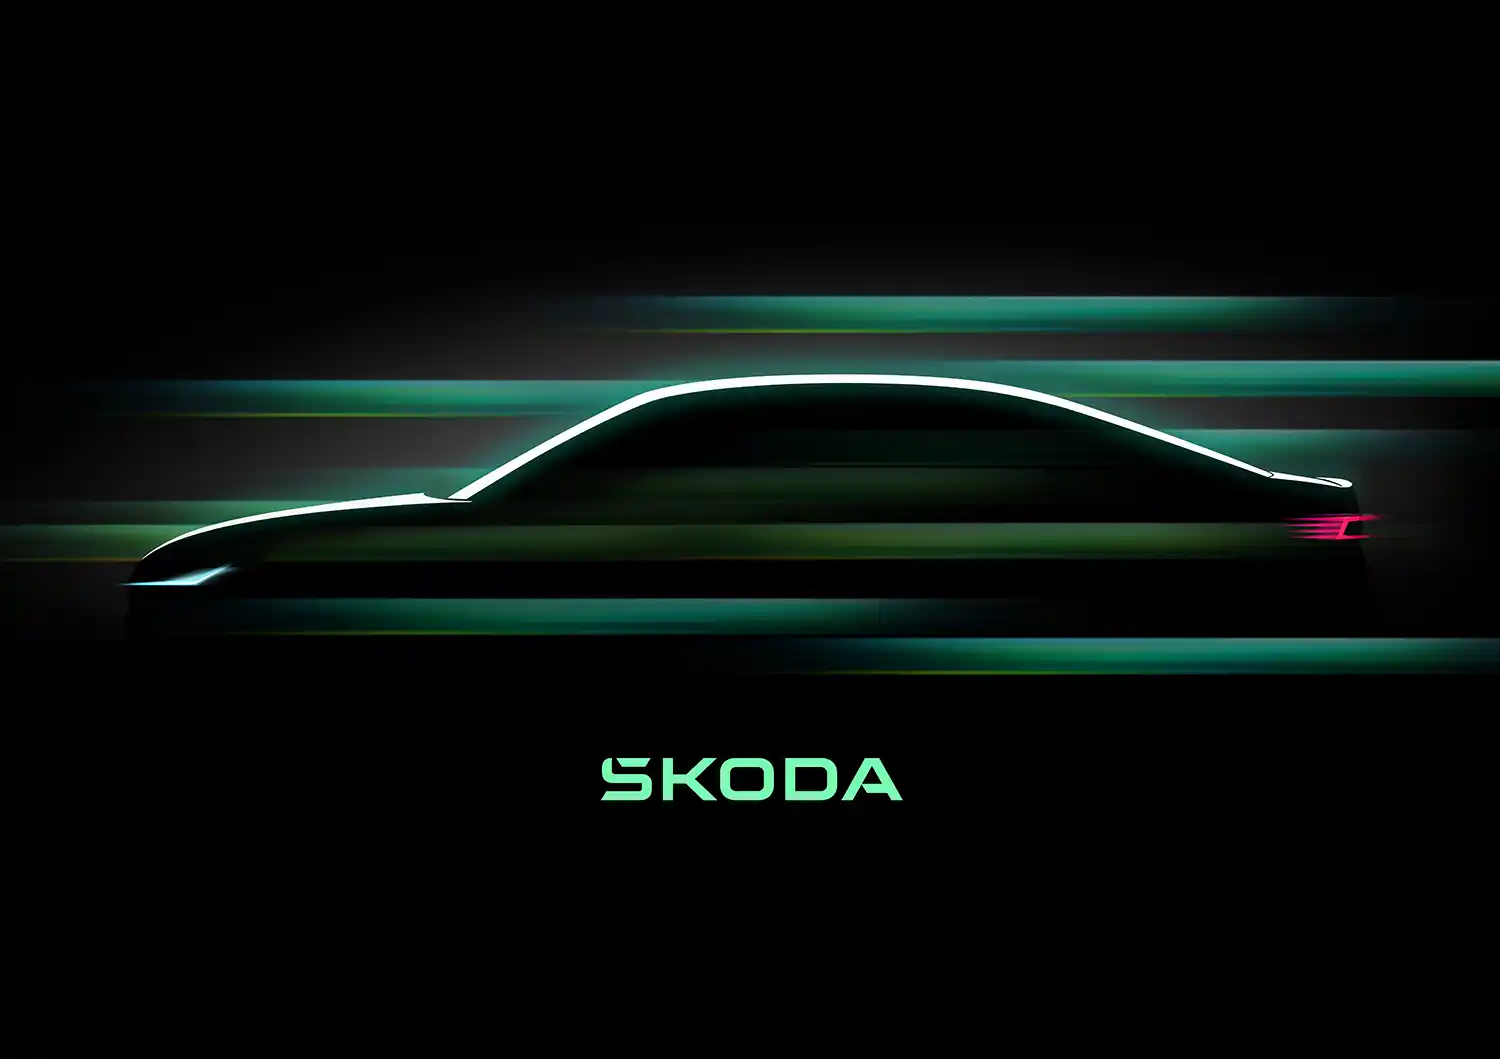 Škoda provides first glimpse of the new Superb Combi estate, Superb hatchback and Kodiaq generations